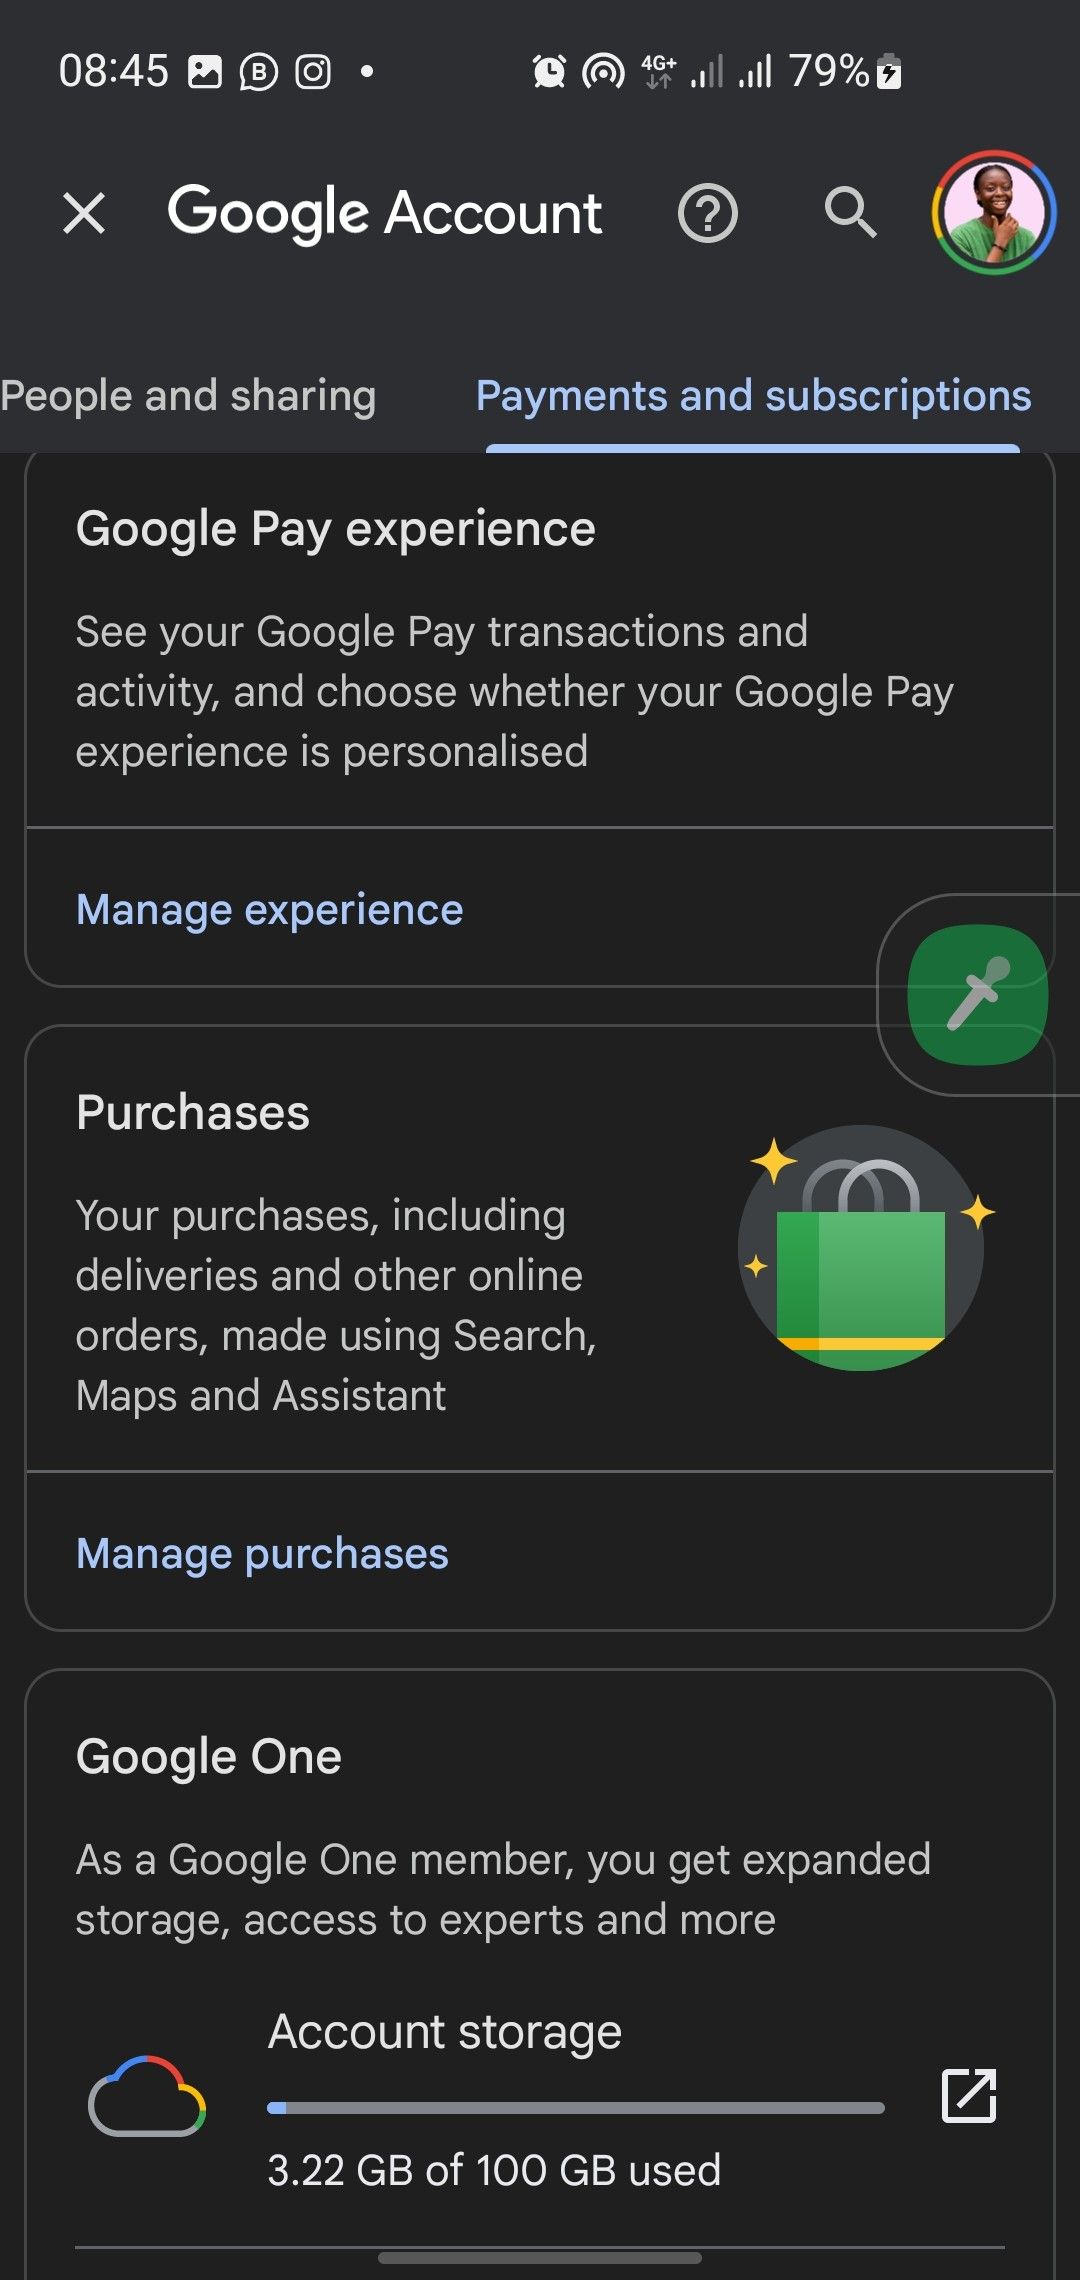 Google Account Payment and Subscriptions Page 